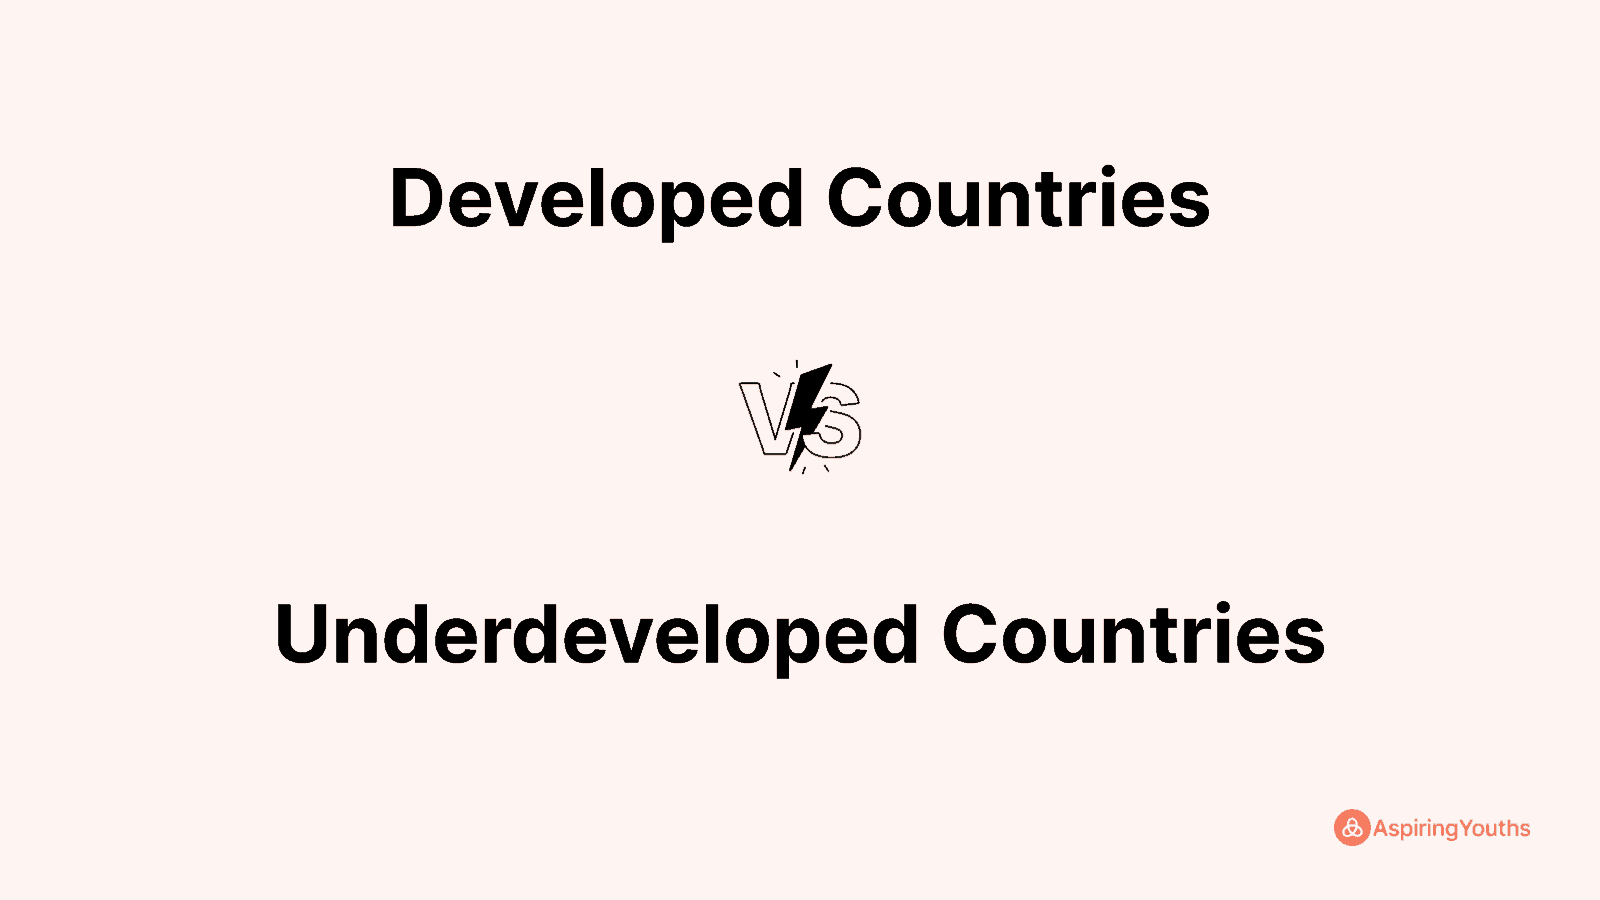 Developed Countries vs Underdeveloped Countries